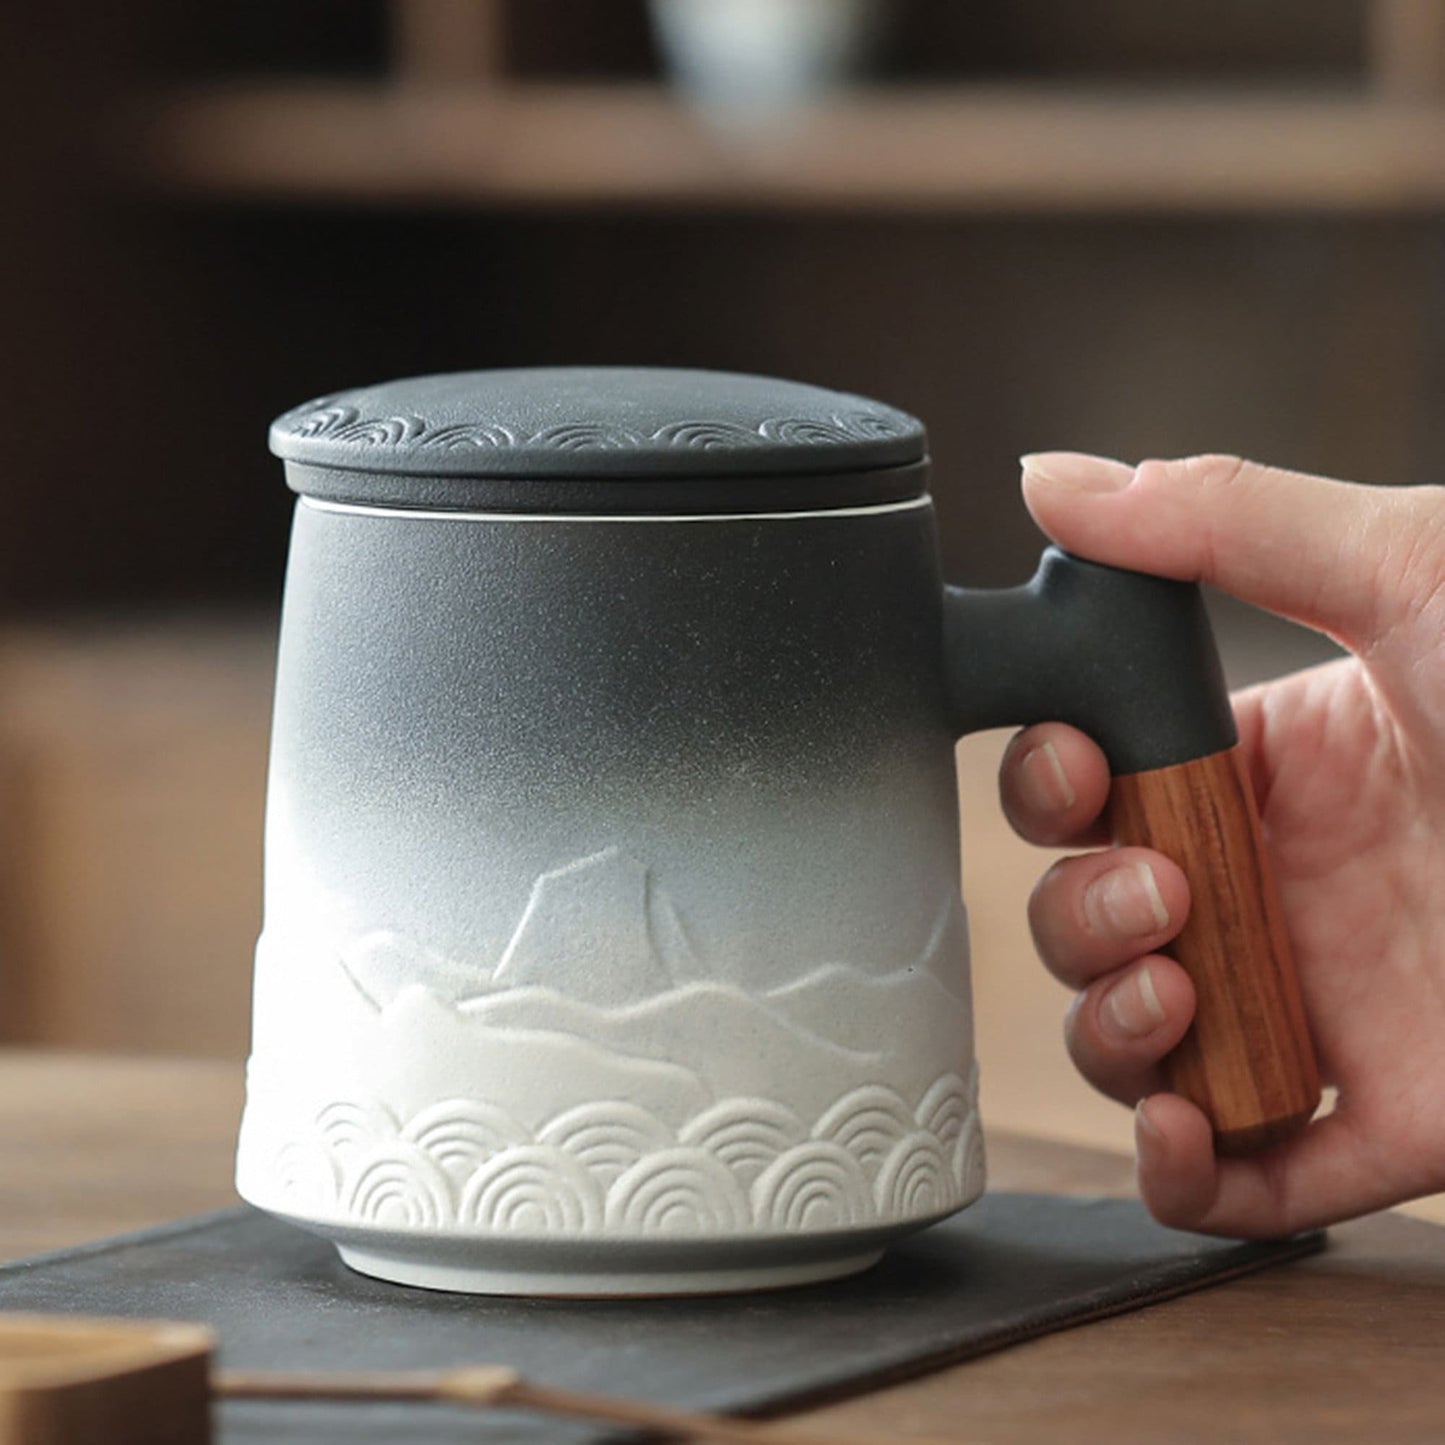 Coffee Mug Japanese Hand-crafted Tea Cup Handmade Ceramic Cup with Infuser and Lid, Tea Mugs With Wooden Handle 450ml